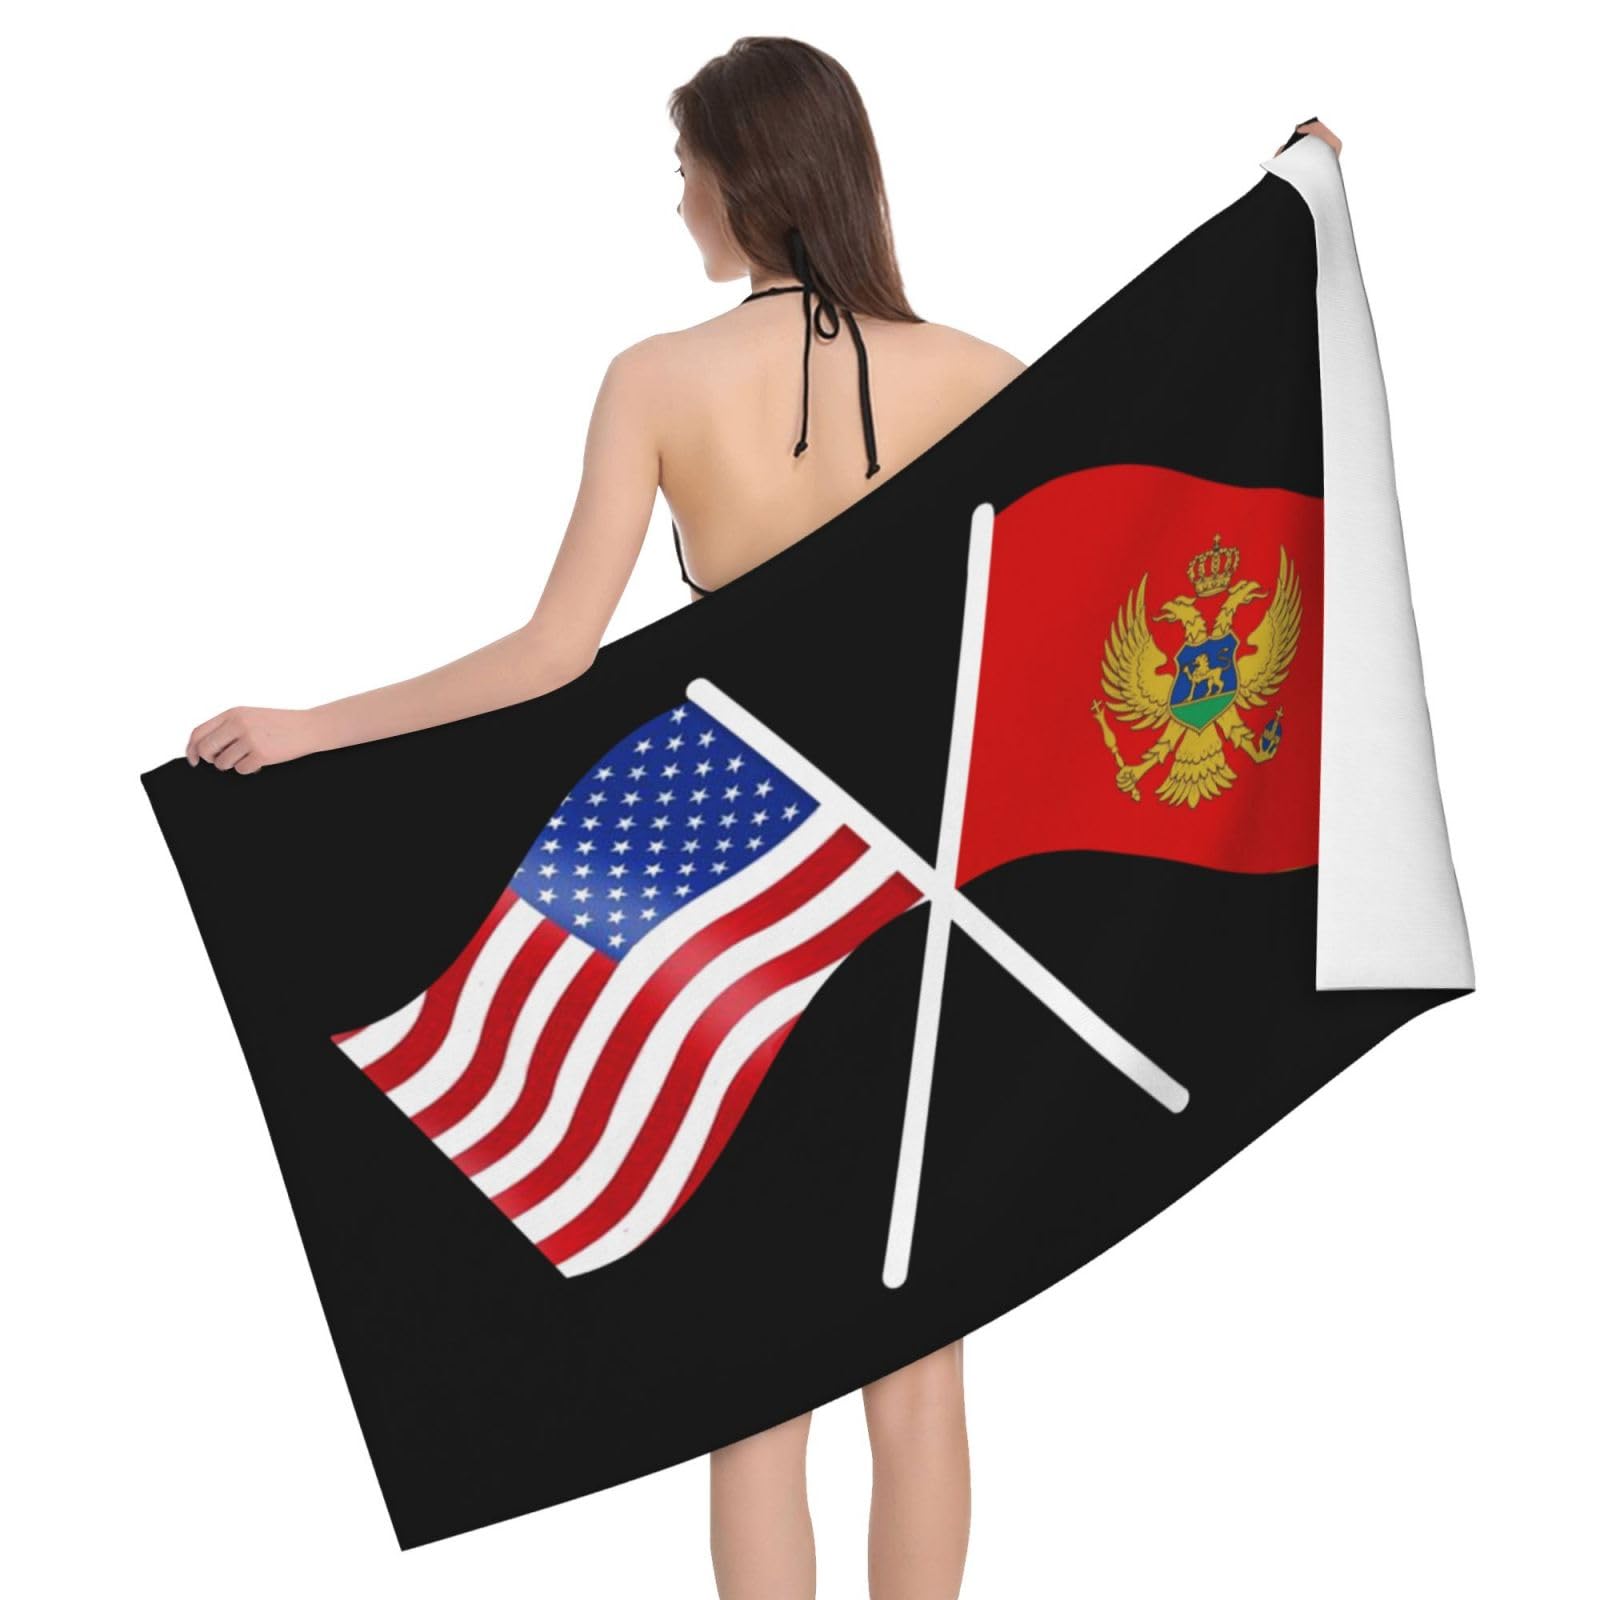 ADOSIA American and Montenegro Flag Beach Towel 32x52in Oversized Soft Absorbent Beach Towel